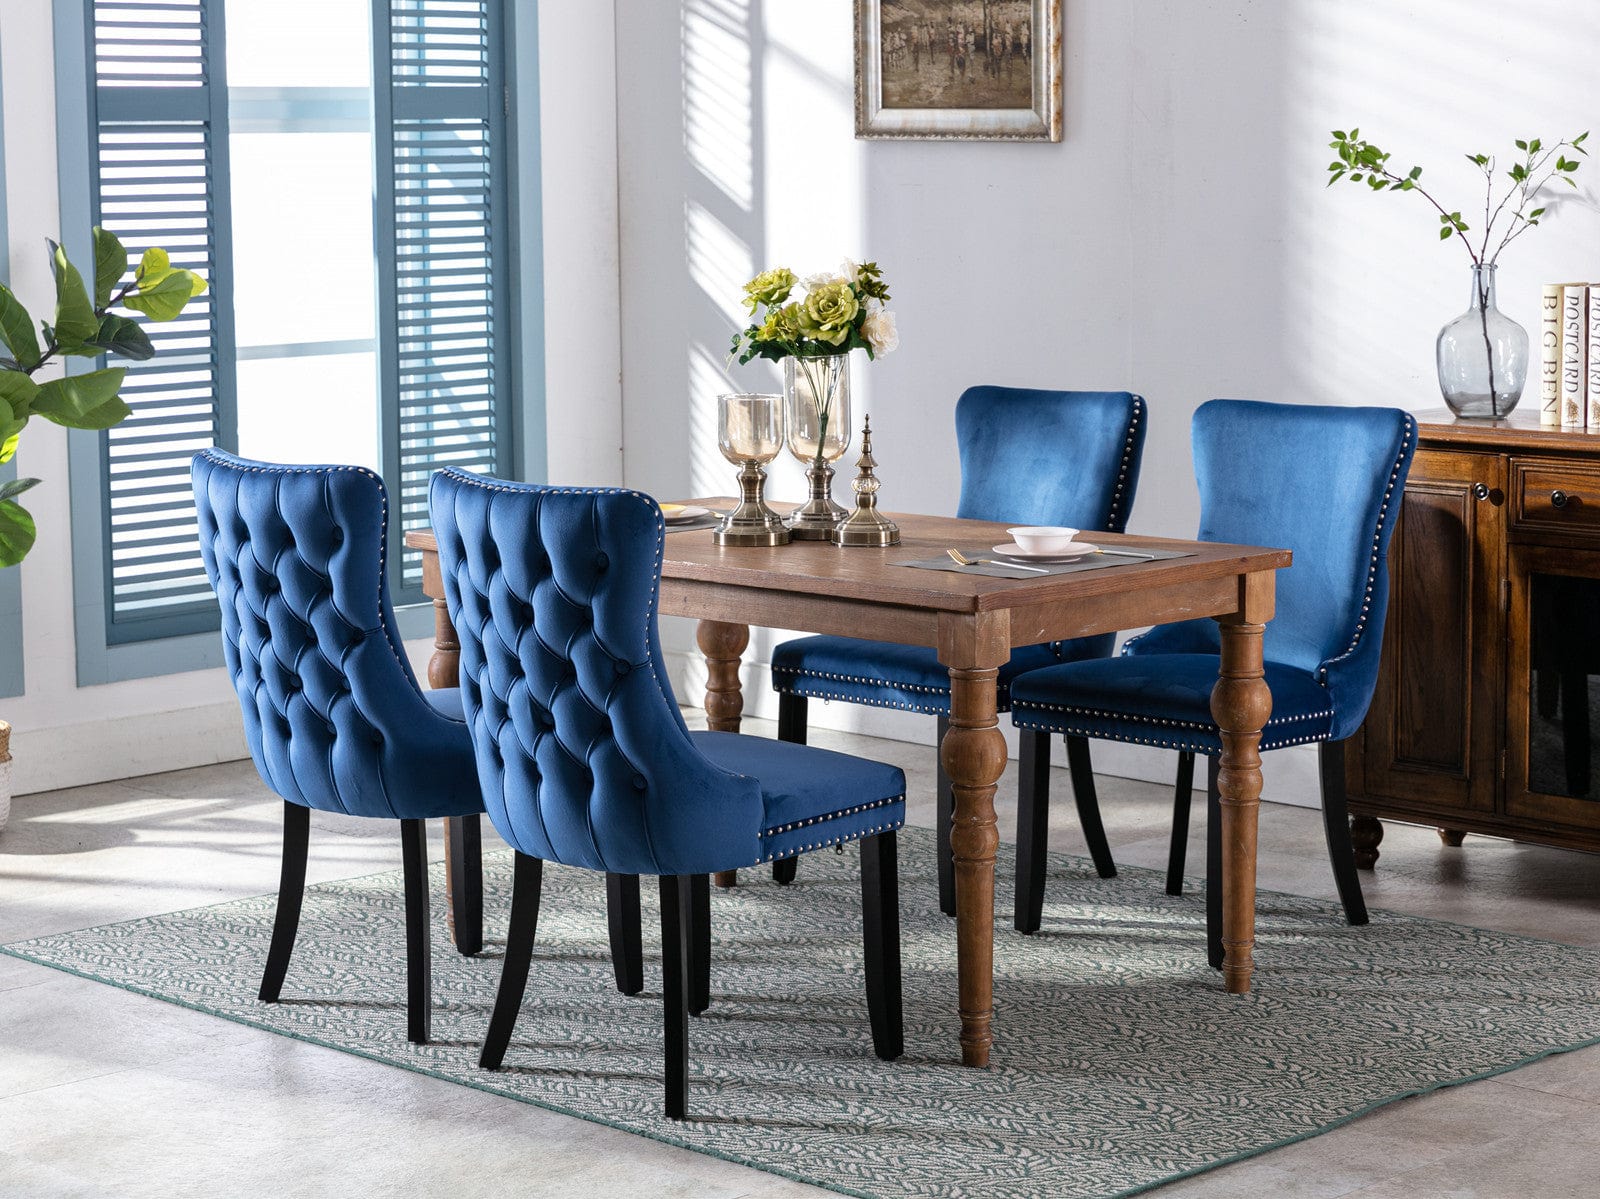 1st Choice Furniture Direct Dining chair 1st Choice Modern Velvet Dining Chair in Blue Finish (Set of 2)